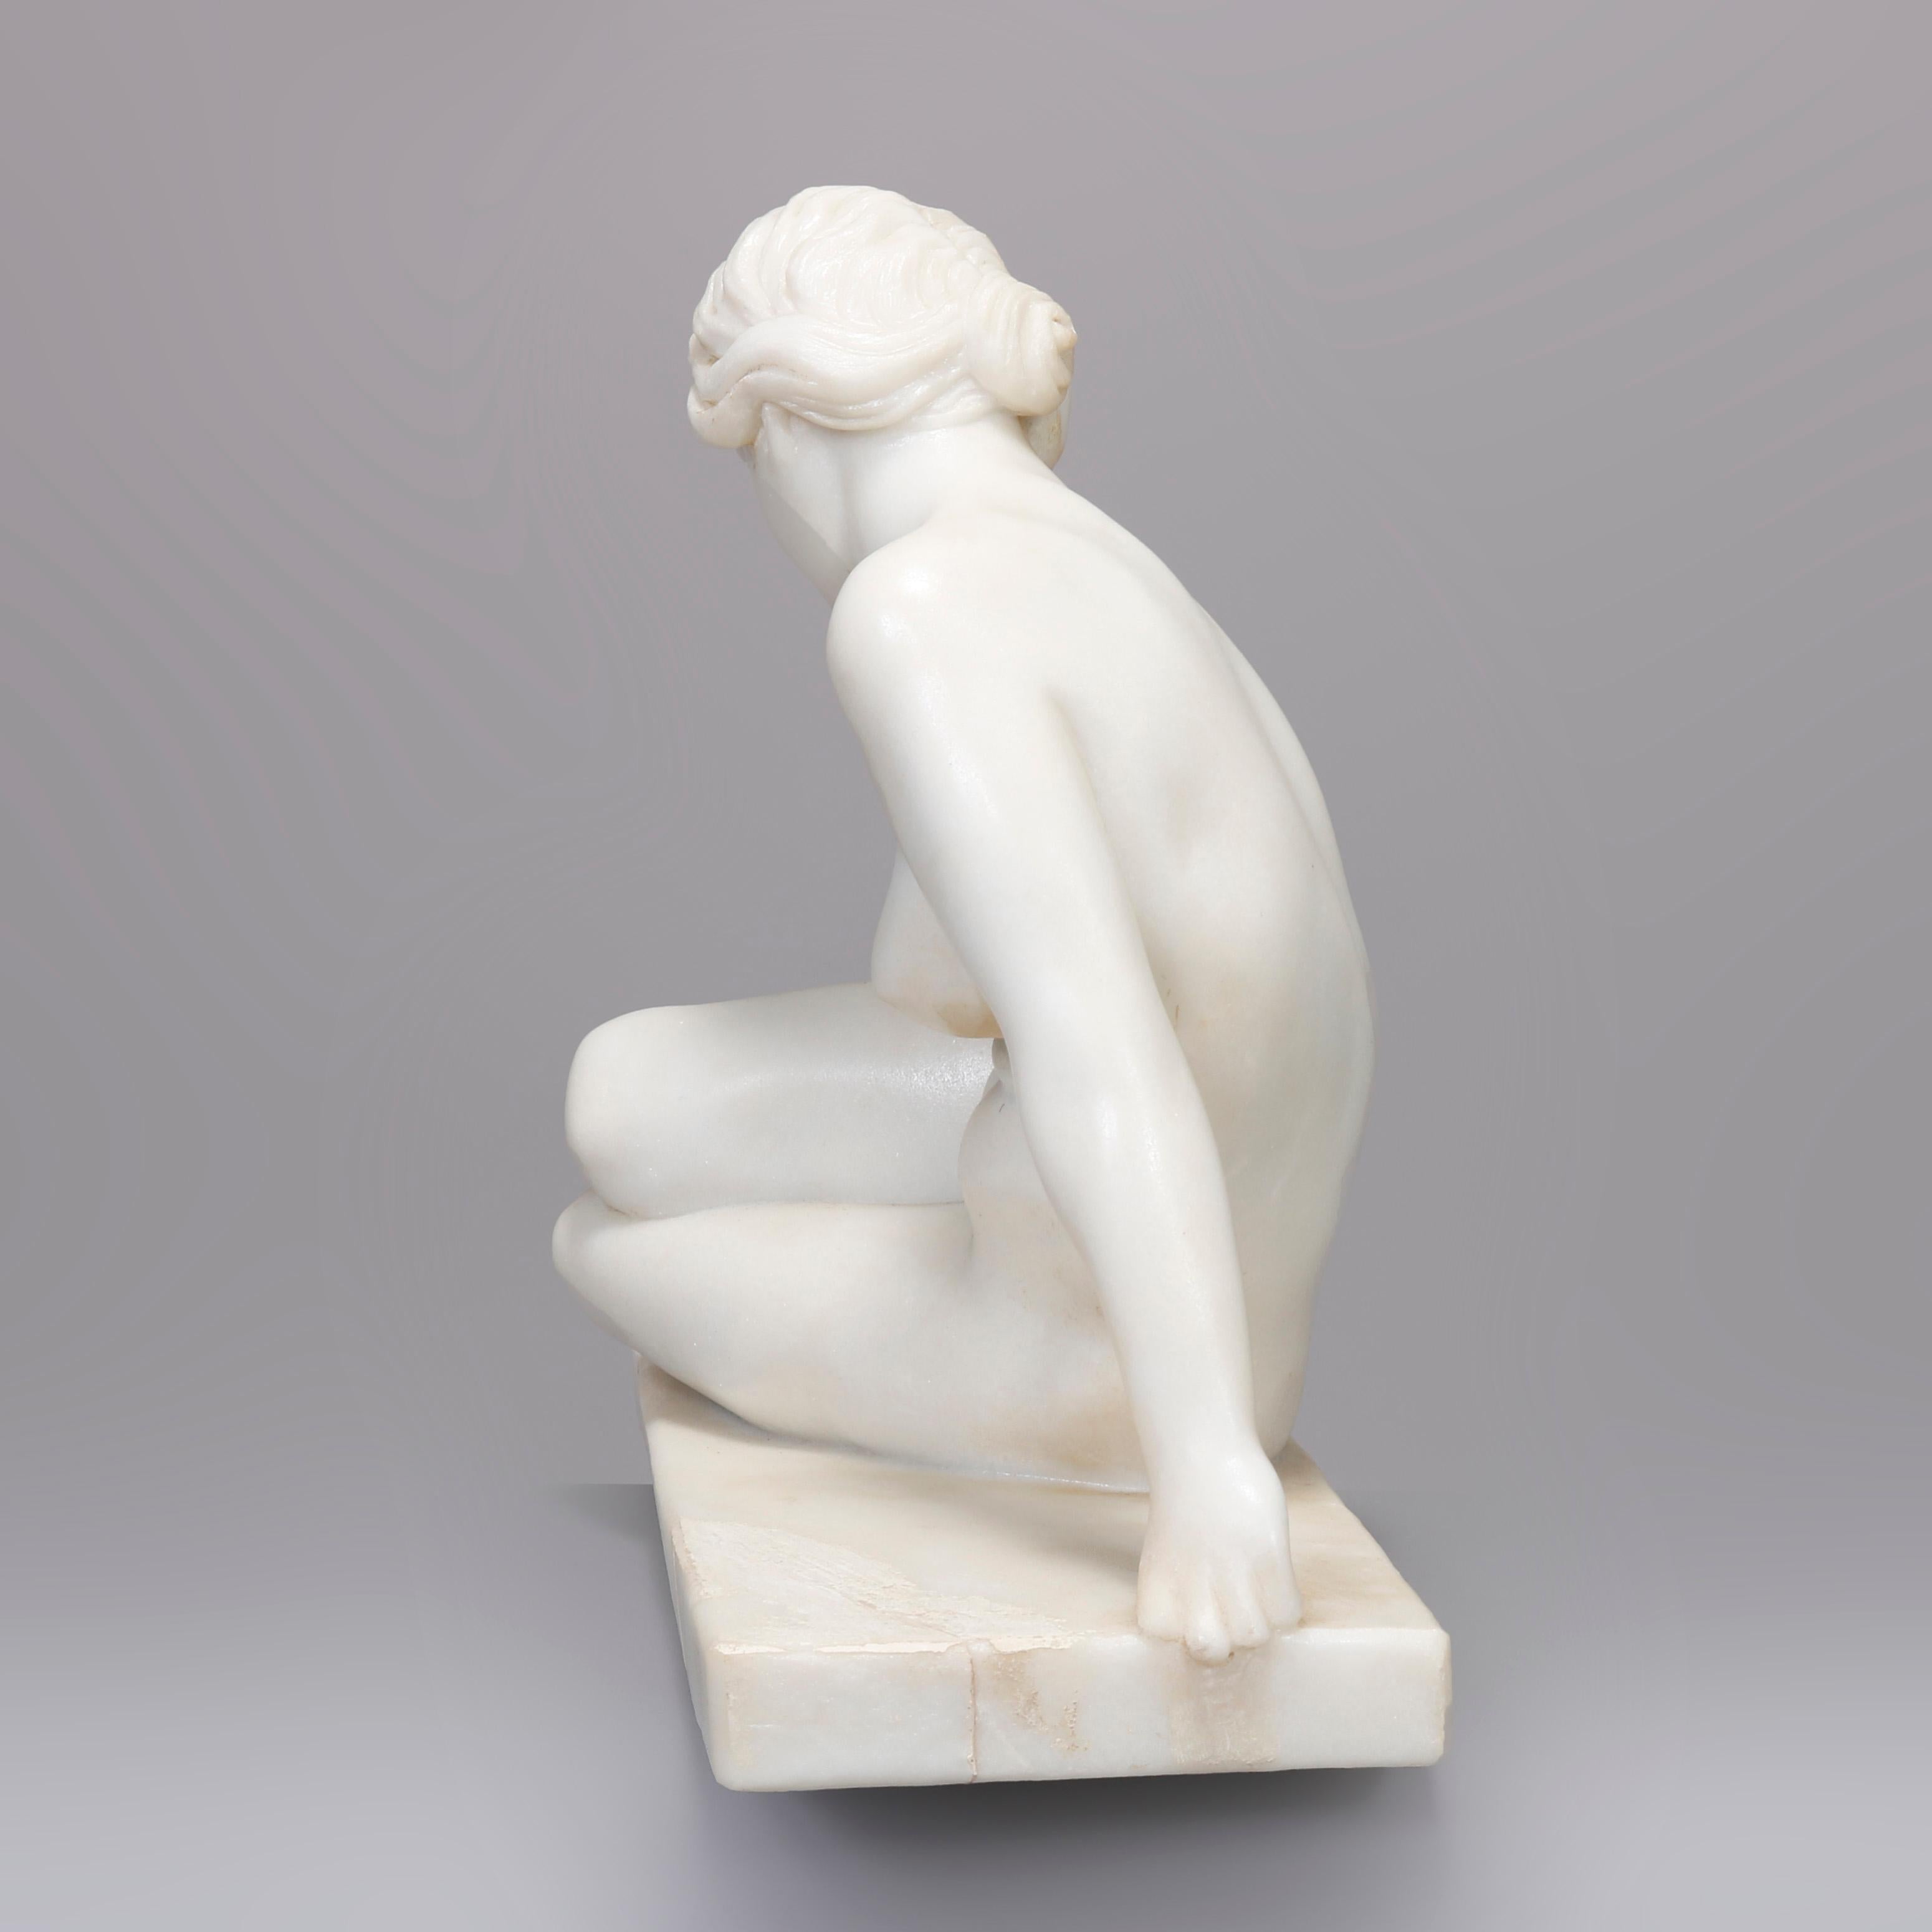 Neoclassical Art Deco Recumbent Carved Alabaster Nude Portrait Sculpture, Early 20th Century